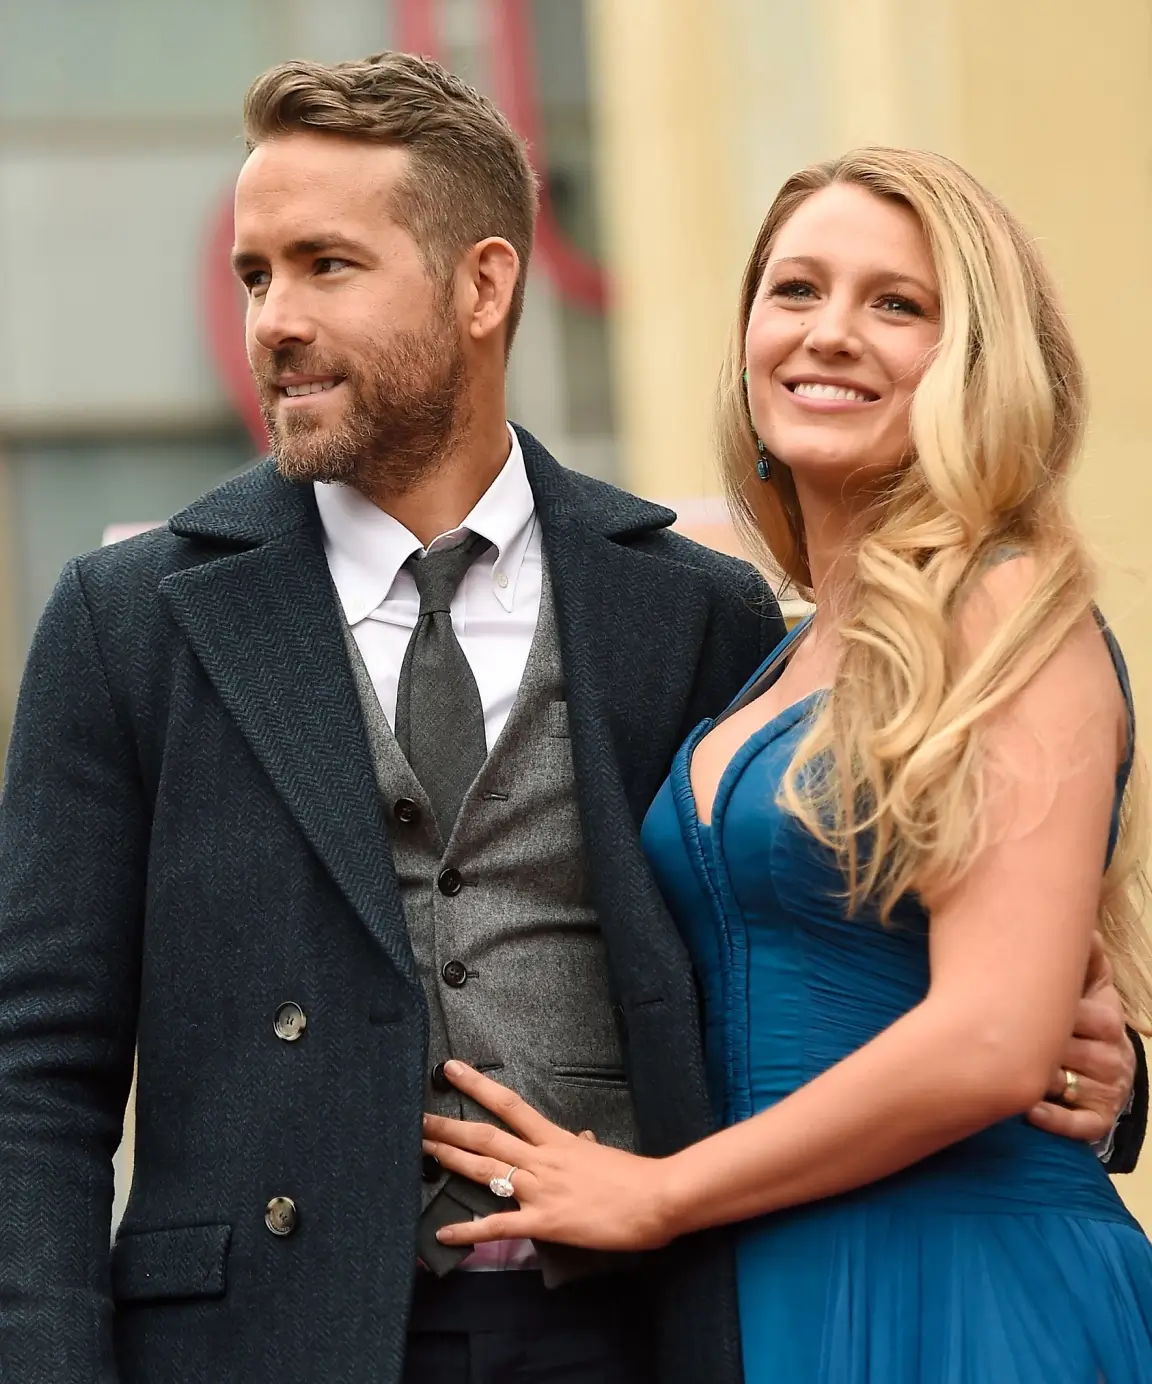 Blake Lively Engagement Ring: Get the Iconic Look